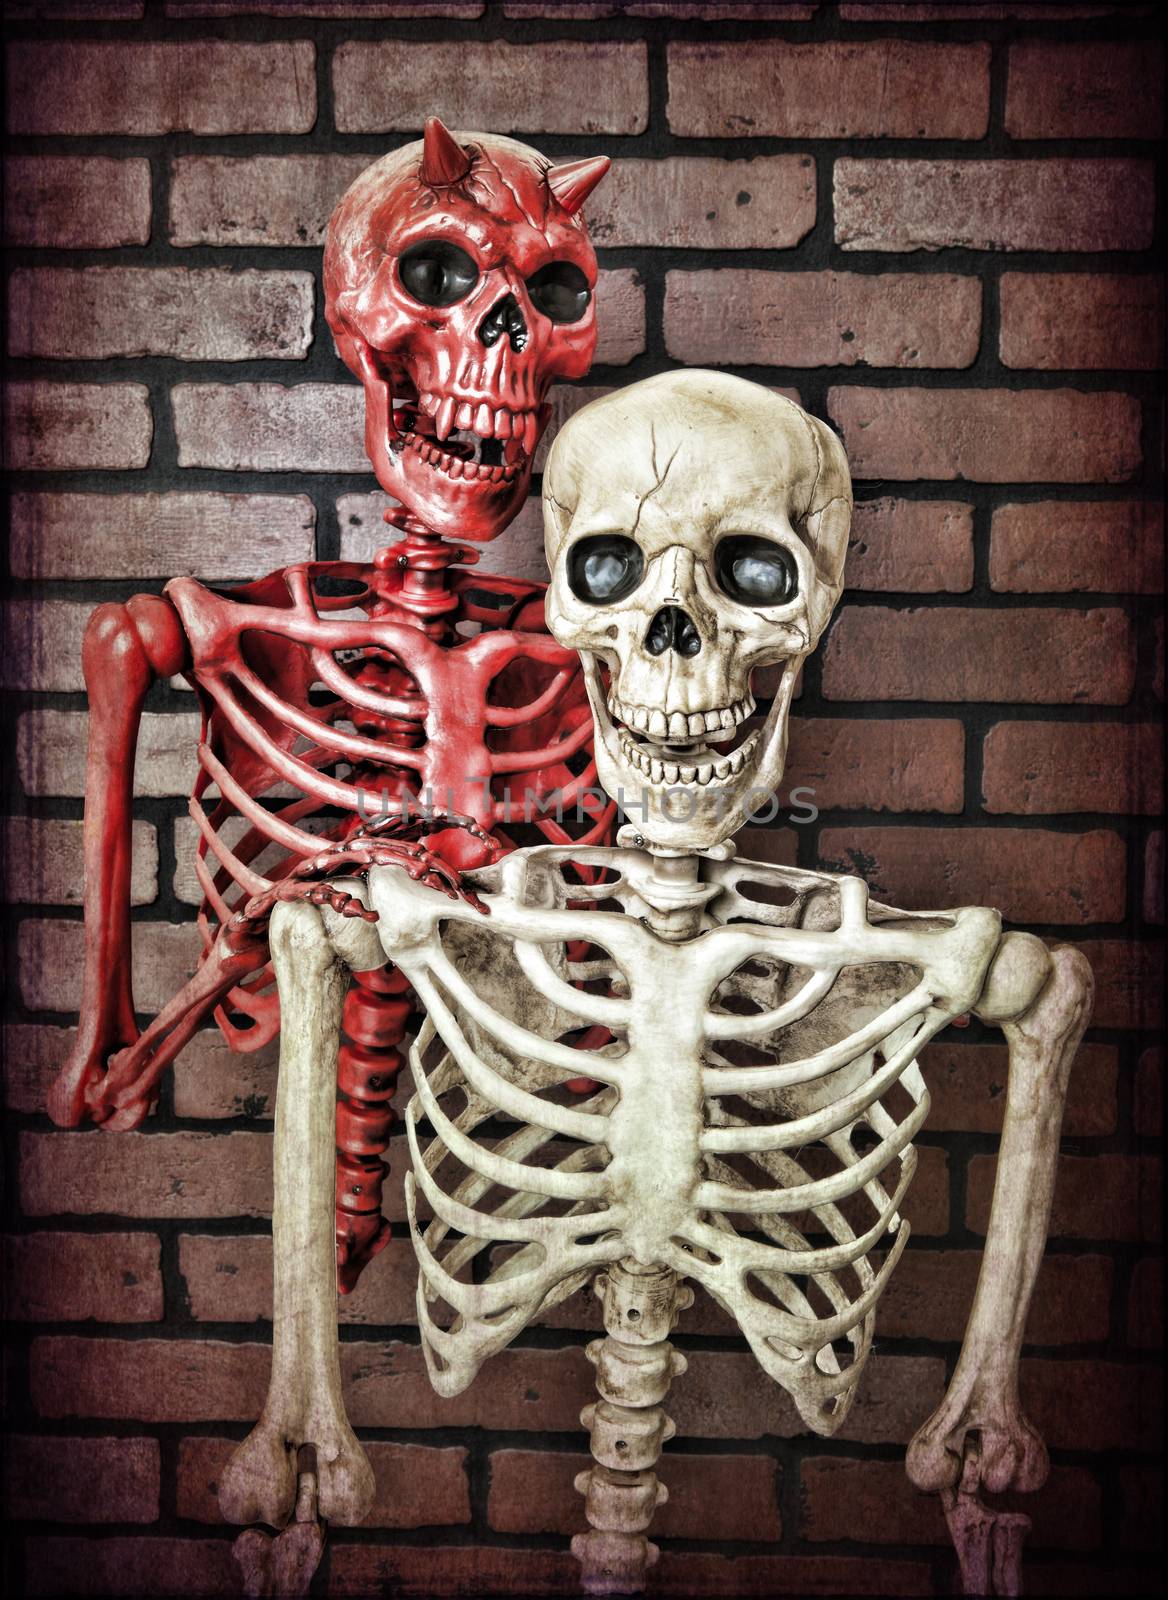 An innocent skeleton with the devil riding on his shoulder trying to tempt him to do something evil.